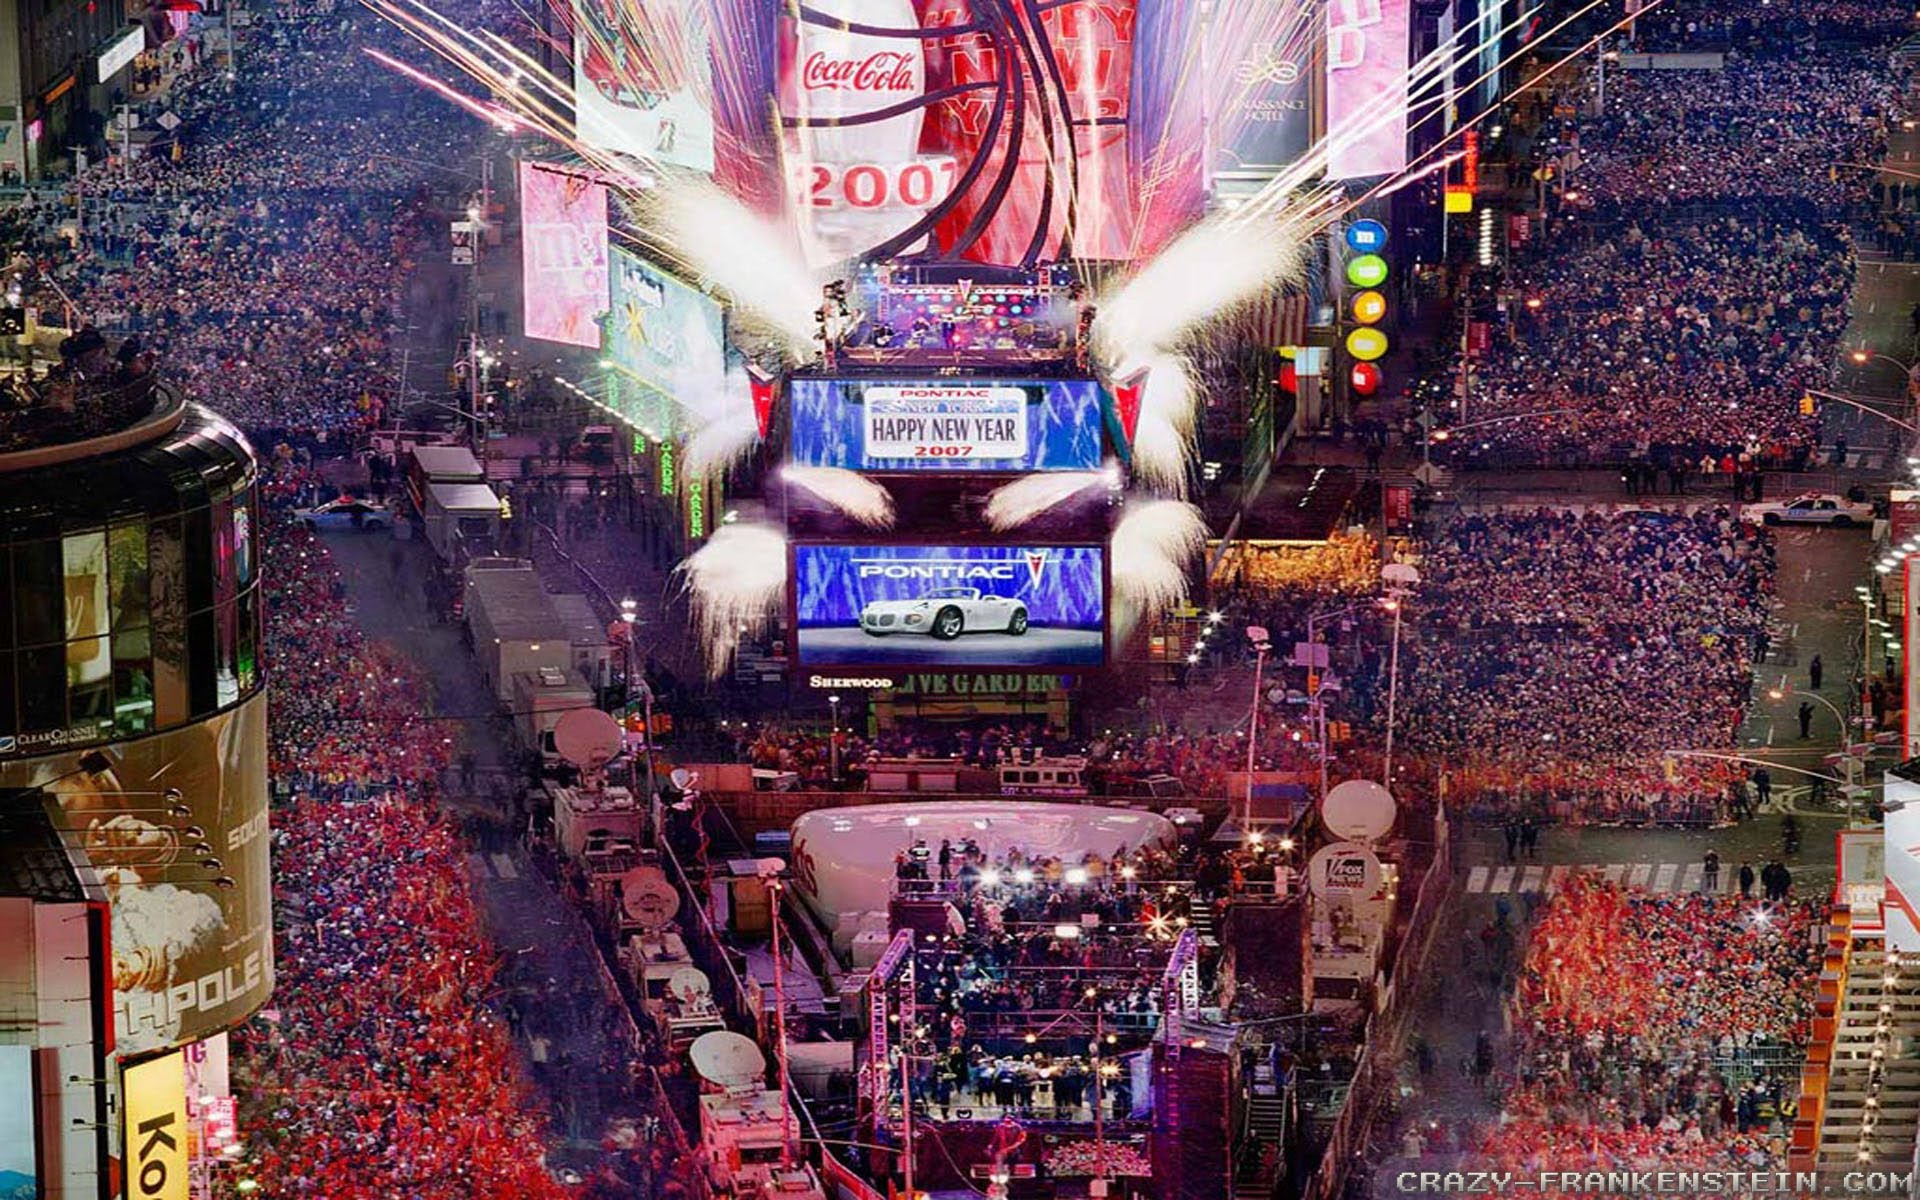 Times Square New Year's Eve 2014 - wallpaper.